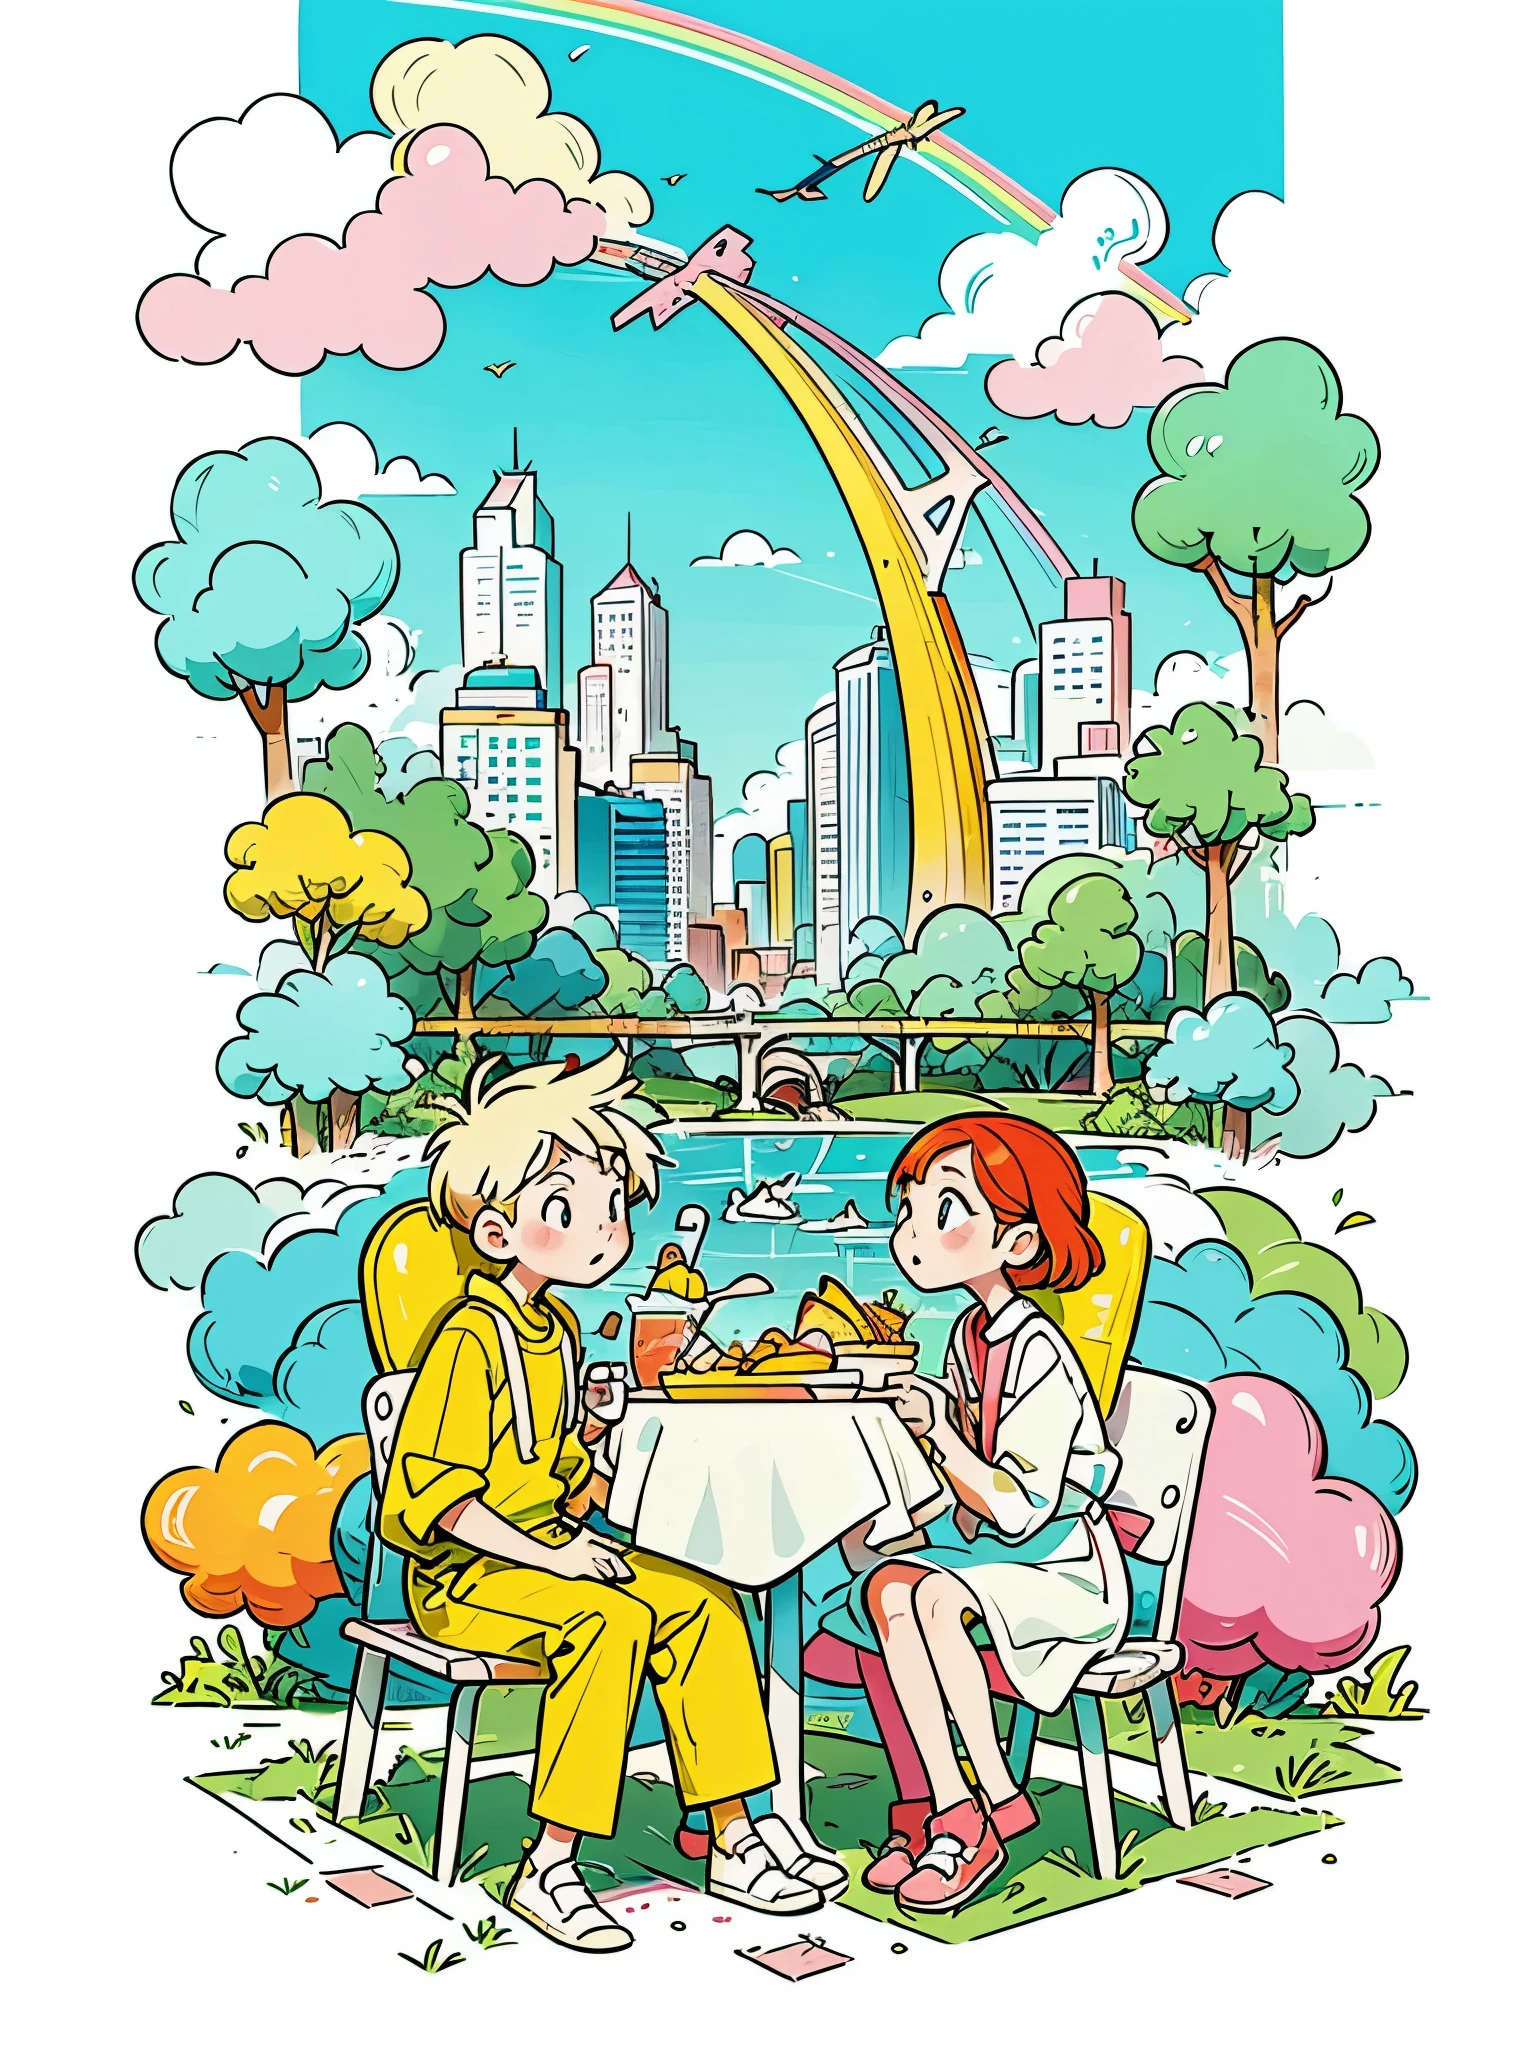 Vector illustration of young, fashionable men and women picnicking in the park, with flowing lines and warm colors set against a white background. The scene captures the essence of a modern, stylish park environment, where young people gather to relax and enjoy each other's company. The design features clean, simple lines and a limited color palette, emphasizing the sophisticated beauty of the urban park setting. The characters, with their youthful energy and trendy outfits, embody the vibrancy and grace of city life. The super saturated, vivid, and bright colors, rendered in a pop art vector style, lend a sense of surrealism and whimsy to the scene, creating a visually captivating and memorable composition.